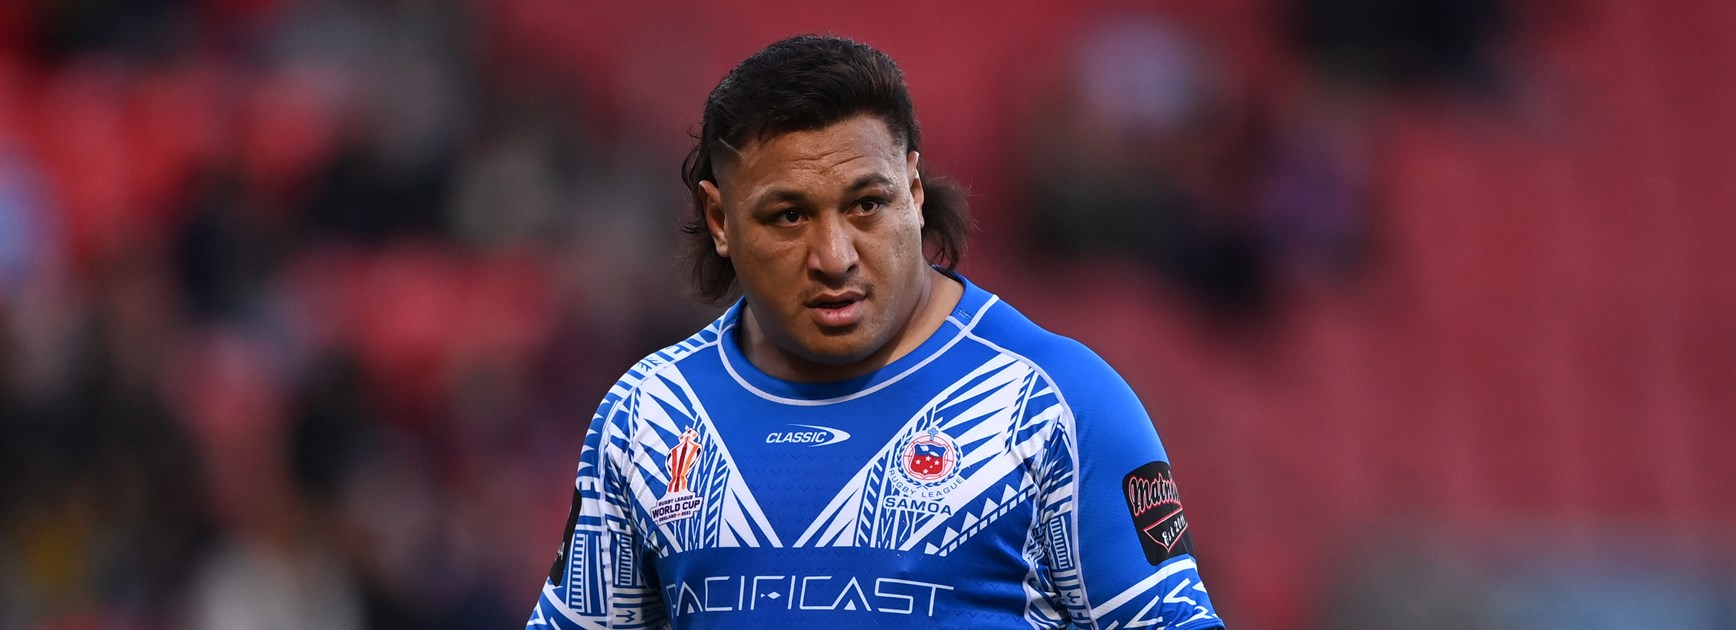 Lemuelu in for Brown as Samoa name squad for World Cup Final